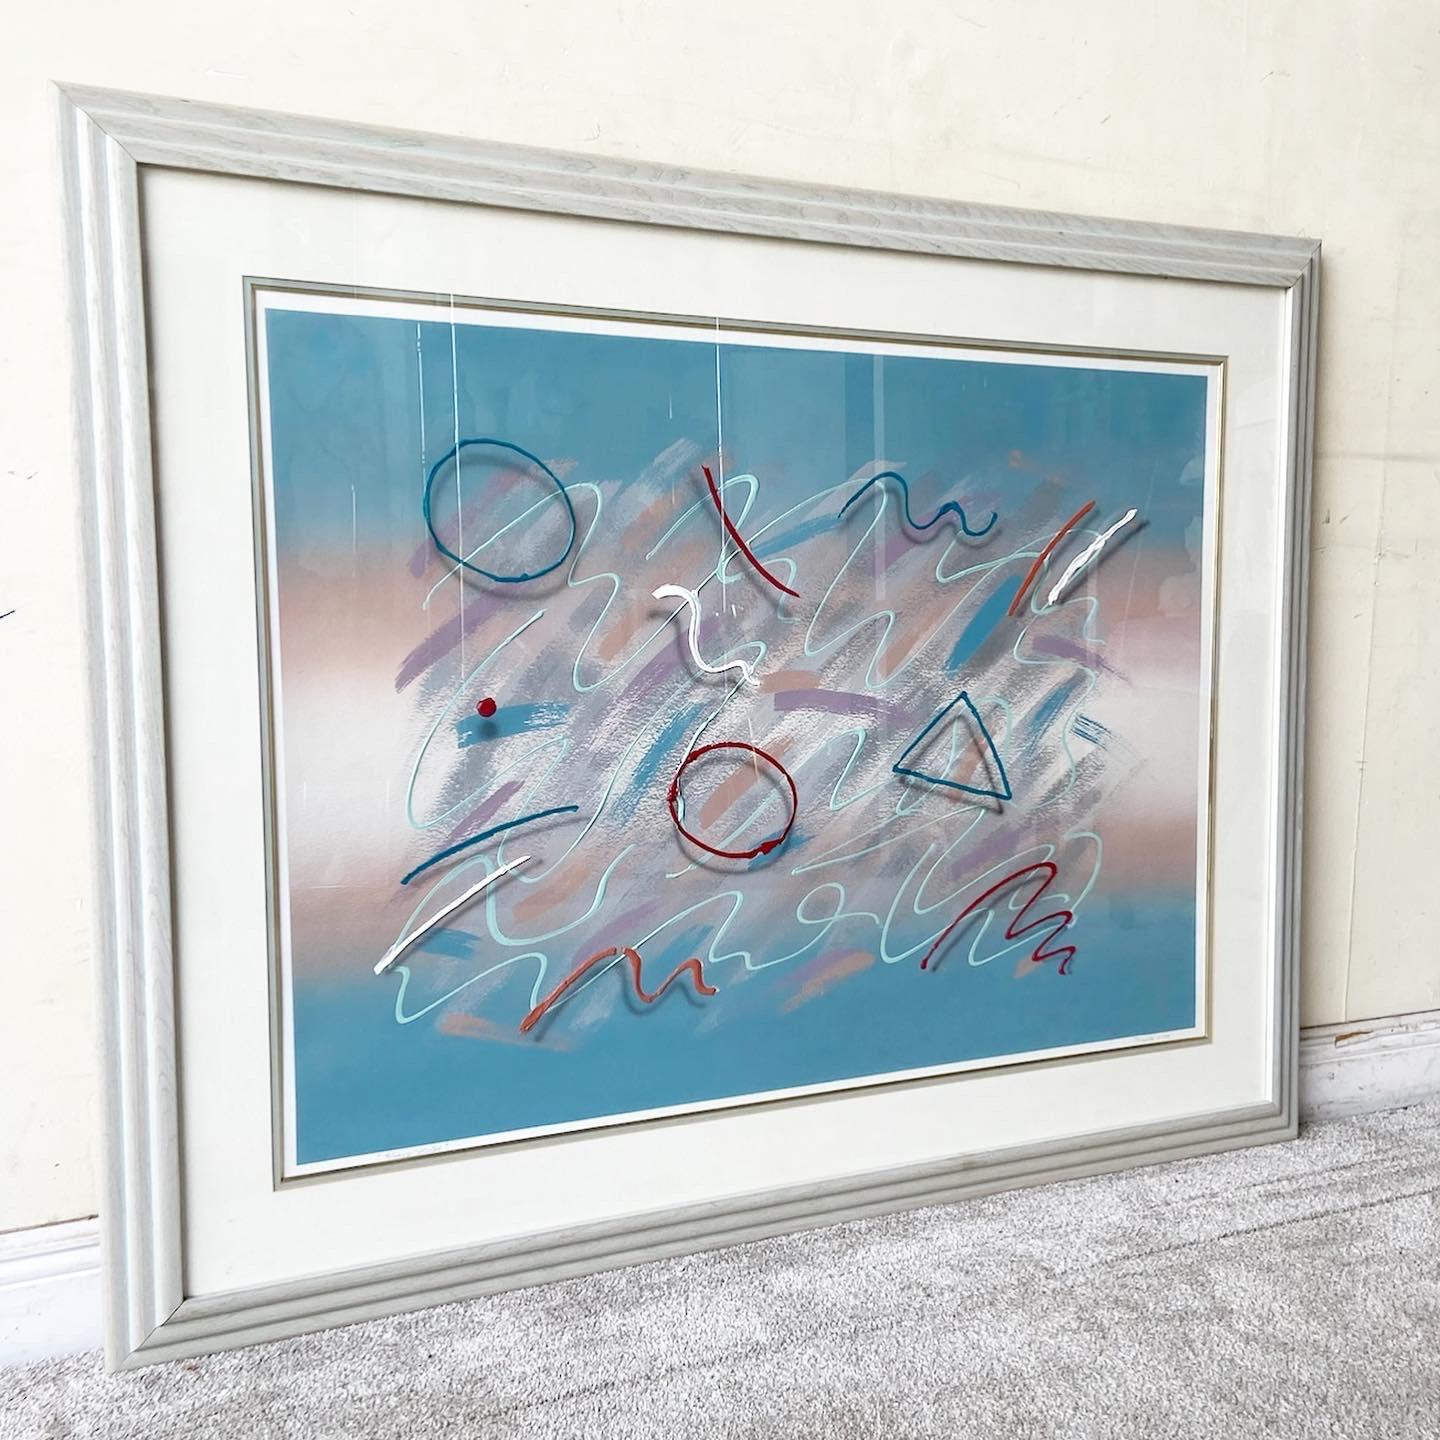 Excellent Postmodern signed painting titled “Heavy Metal”. Features an abstract design of X’s and O’s and lines on a teal backdrop in a wooden and glass frame.